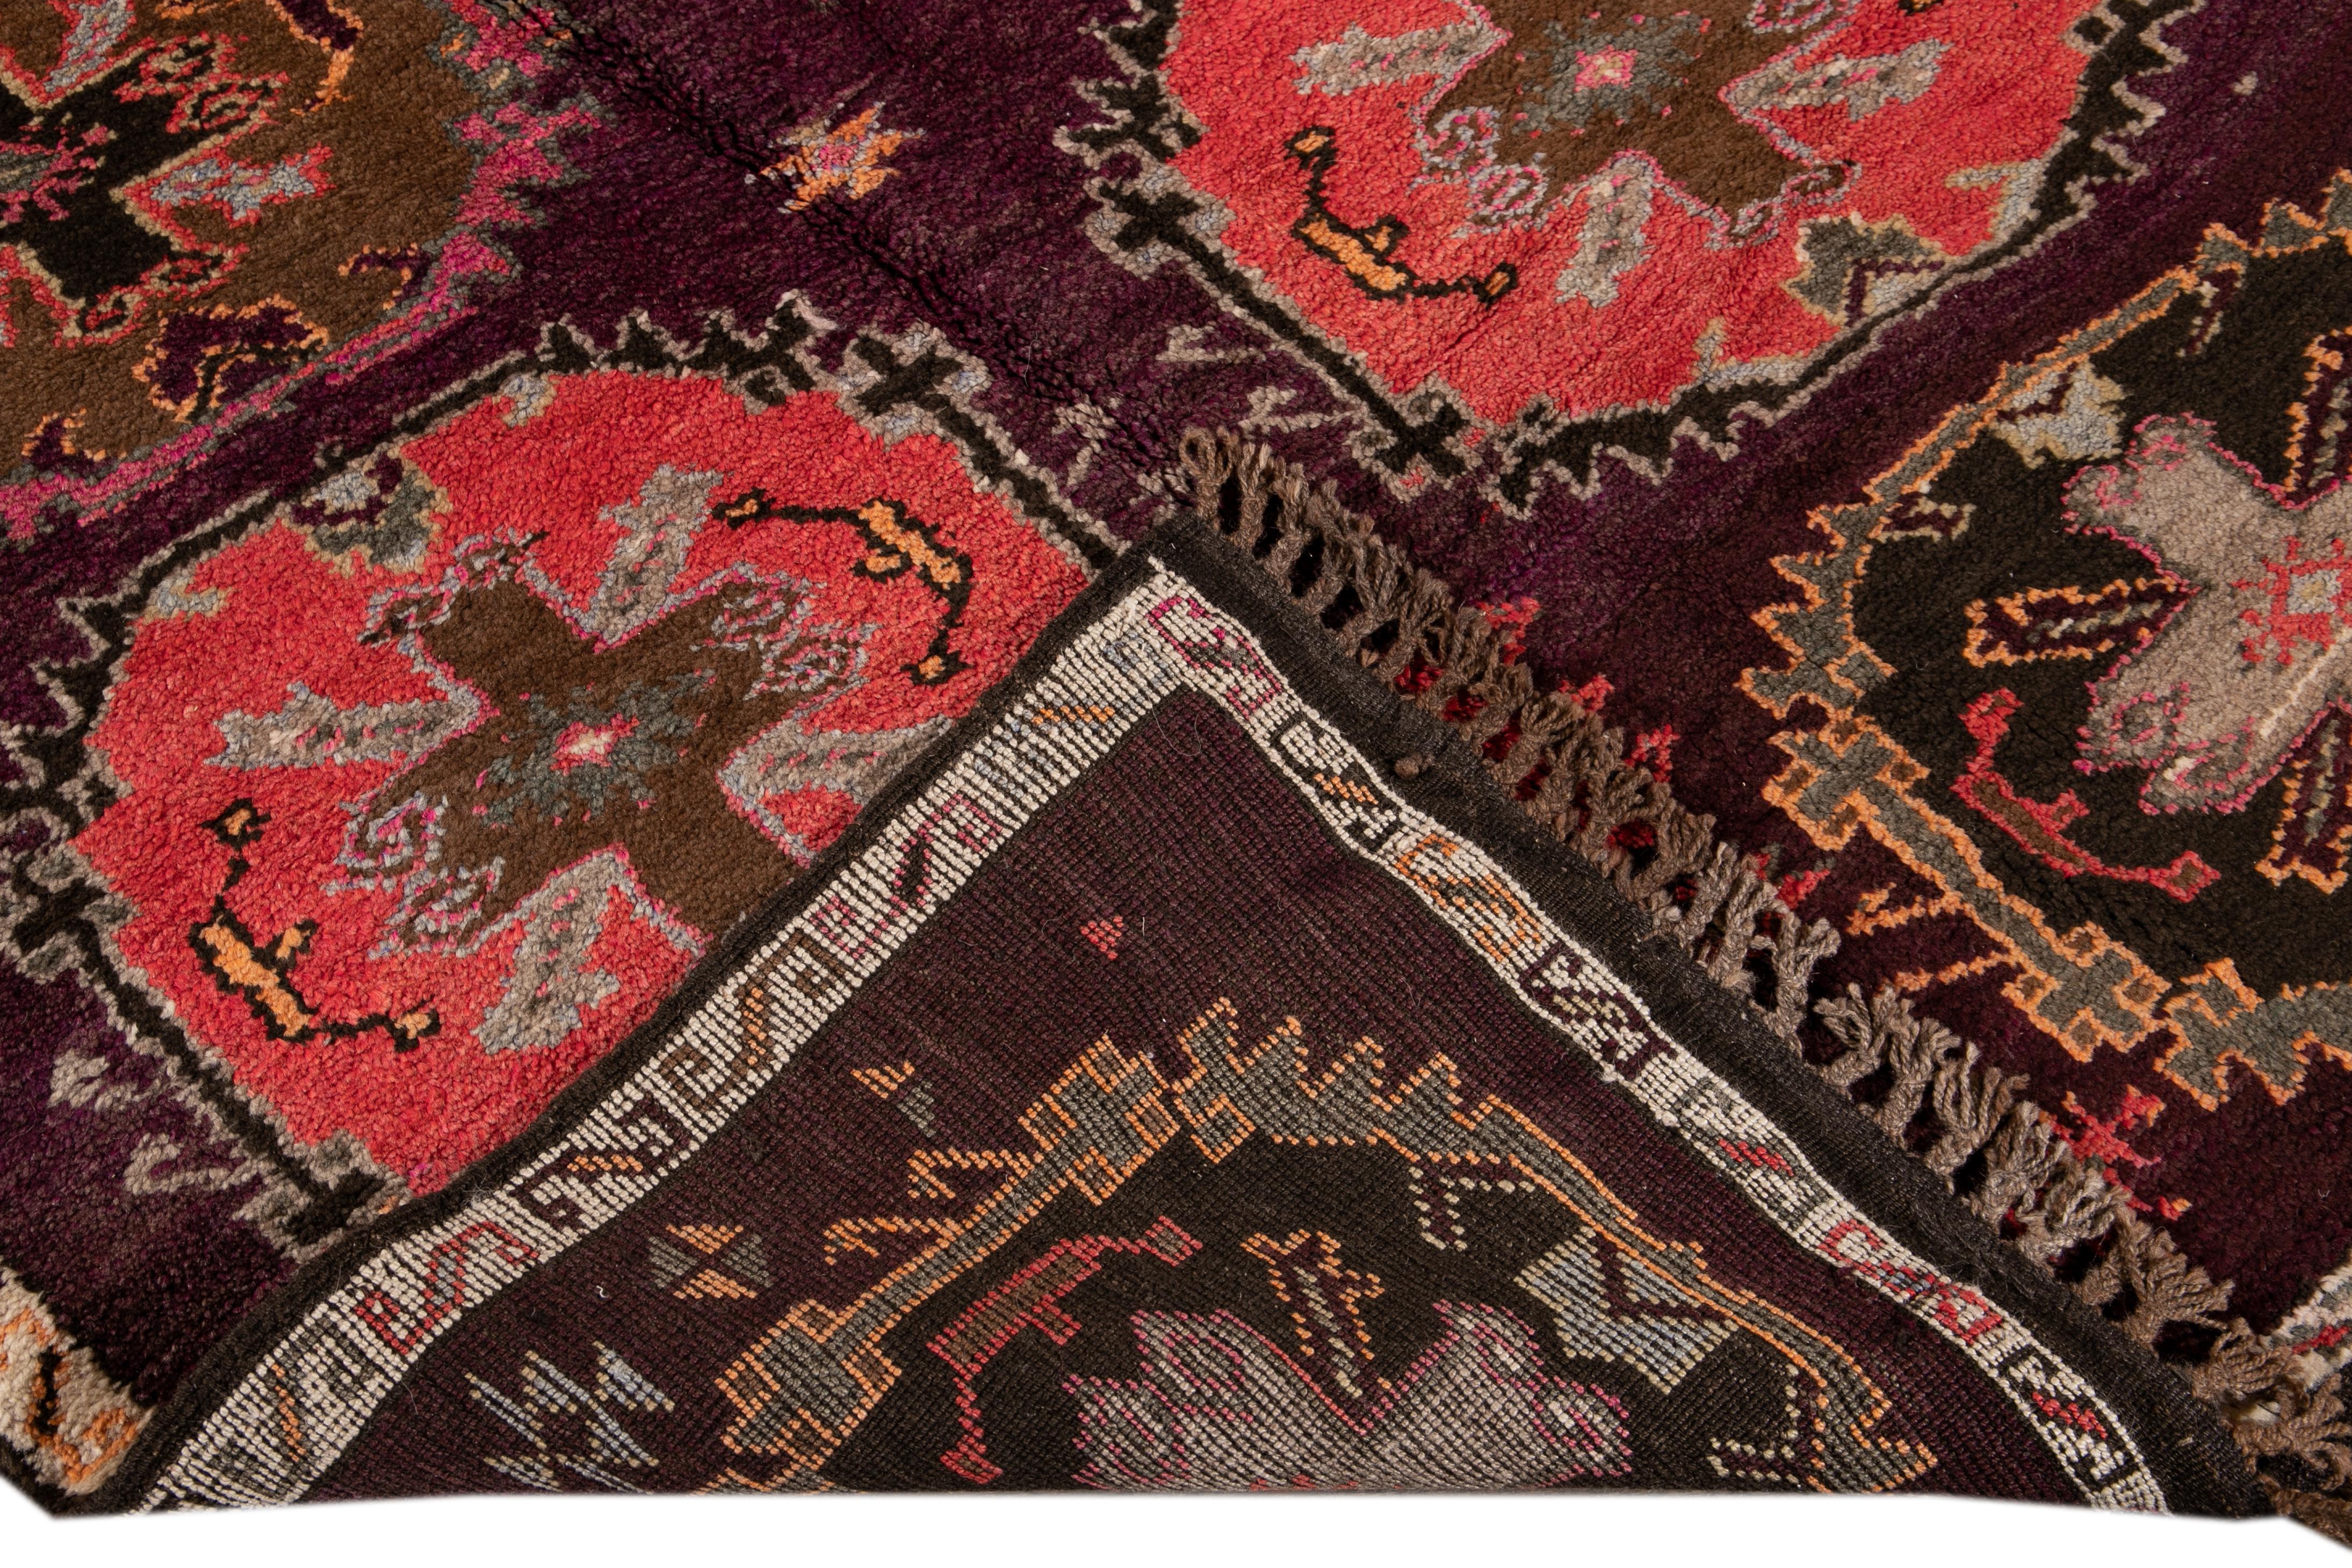 Beautiful vintage Turkish hand-knotted wool rug with a Purple field. This Turkish rug has an Ivory frame and multi-color accents in a gorgeous all-over geometric Tribal design.

This rug measures: 4'10